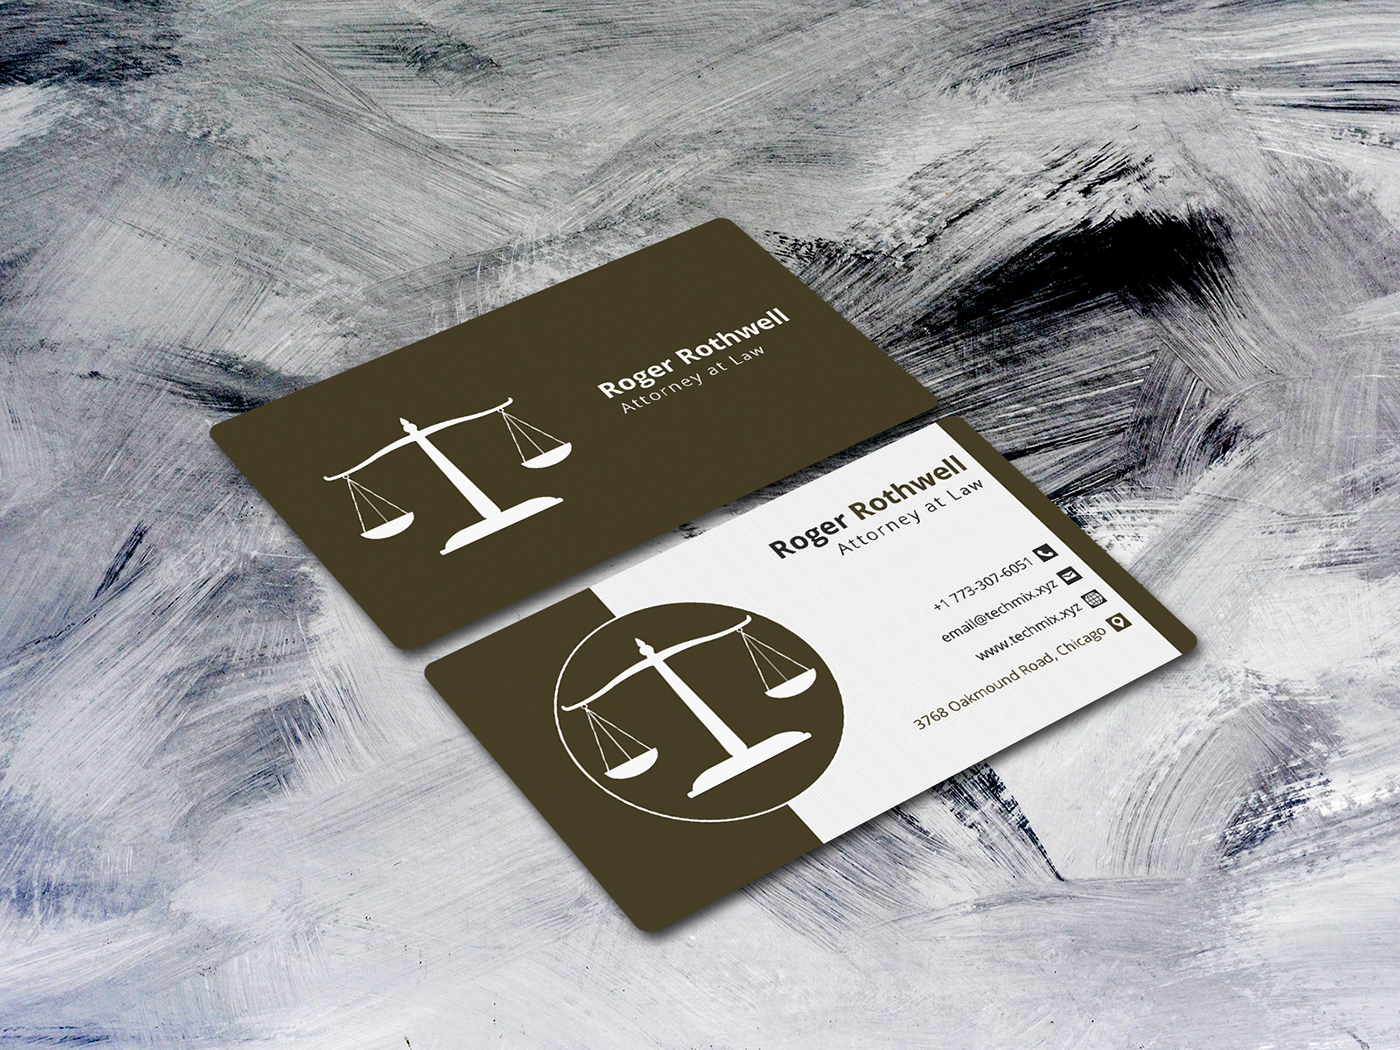 Business card design business card download Business card template business card mockup lawyer business card lawyer visiting card lawer business card